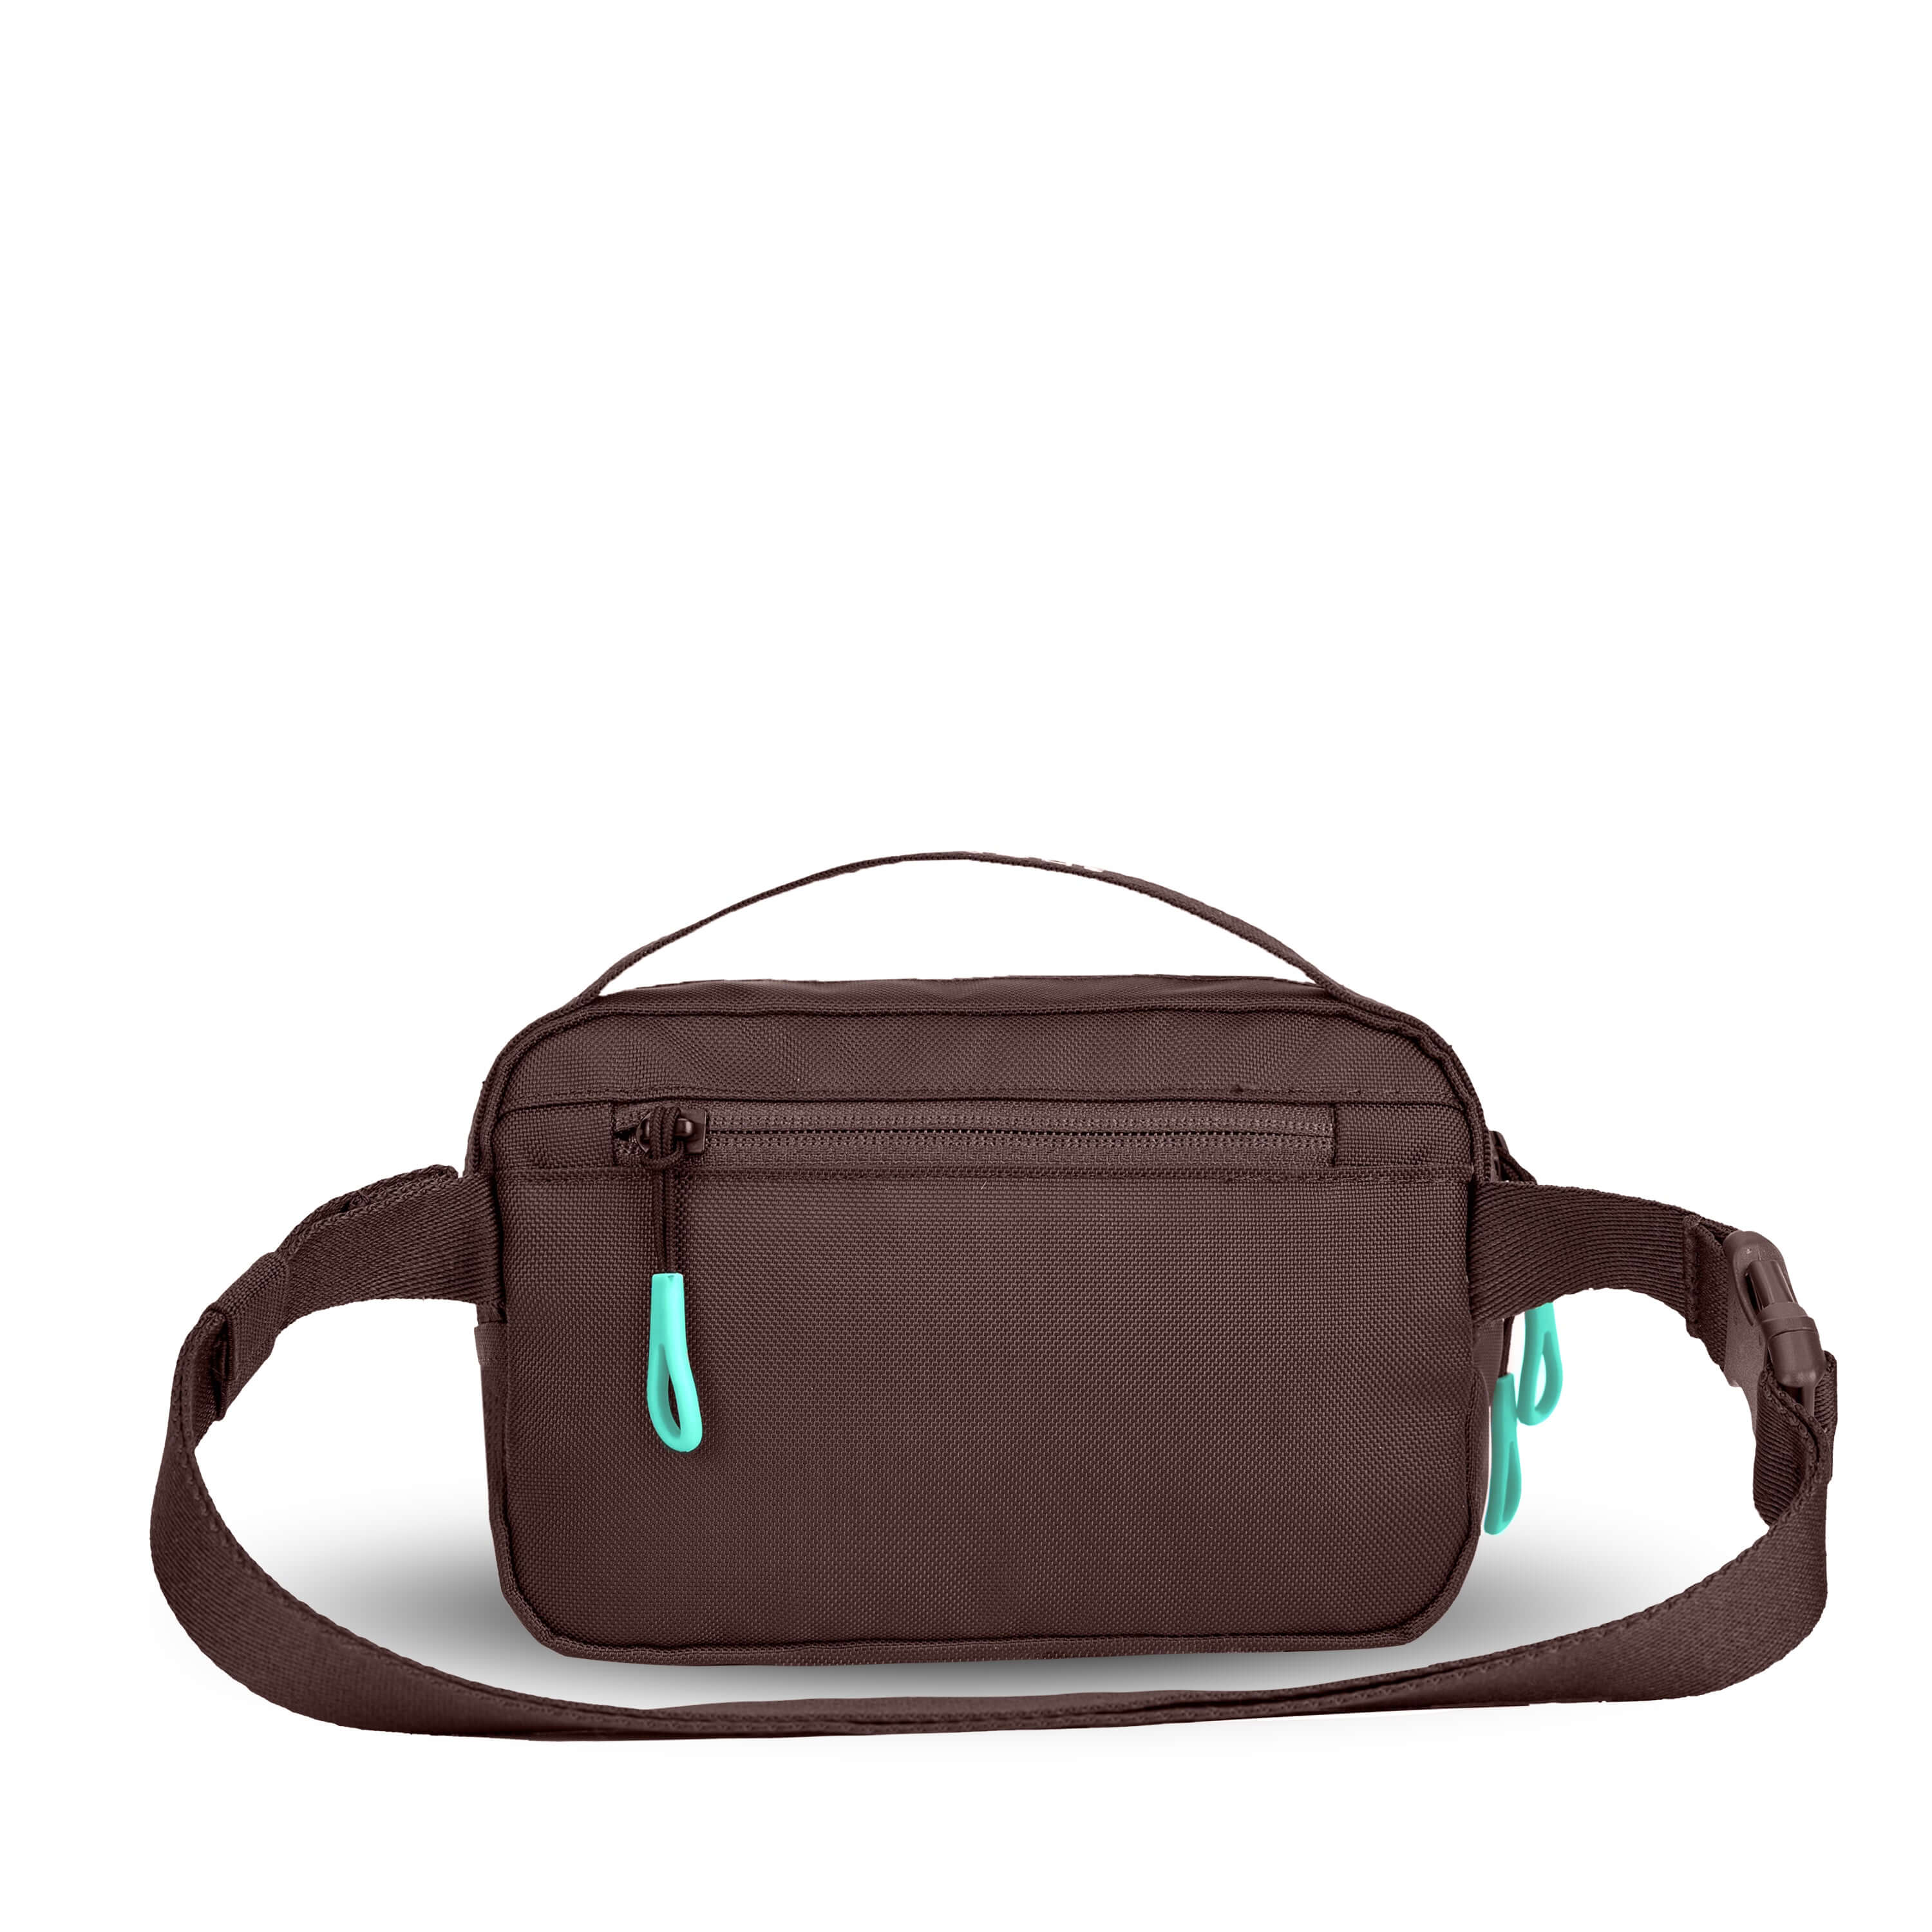 Back view of Sherpani&#39;s fanny pack, the Hyk in Lavender. The back of the bag is brown. Easy-pull zippers are accented in aqua. The fanny pack features an adjustable strap with a buckle.